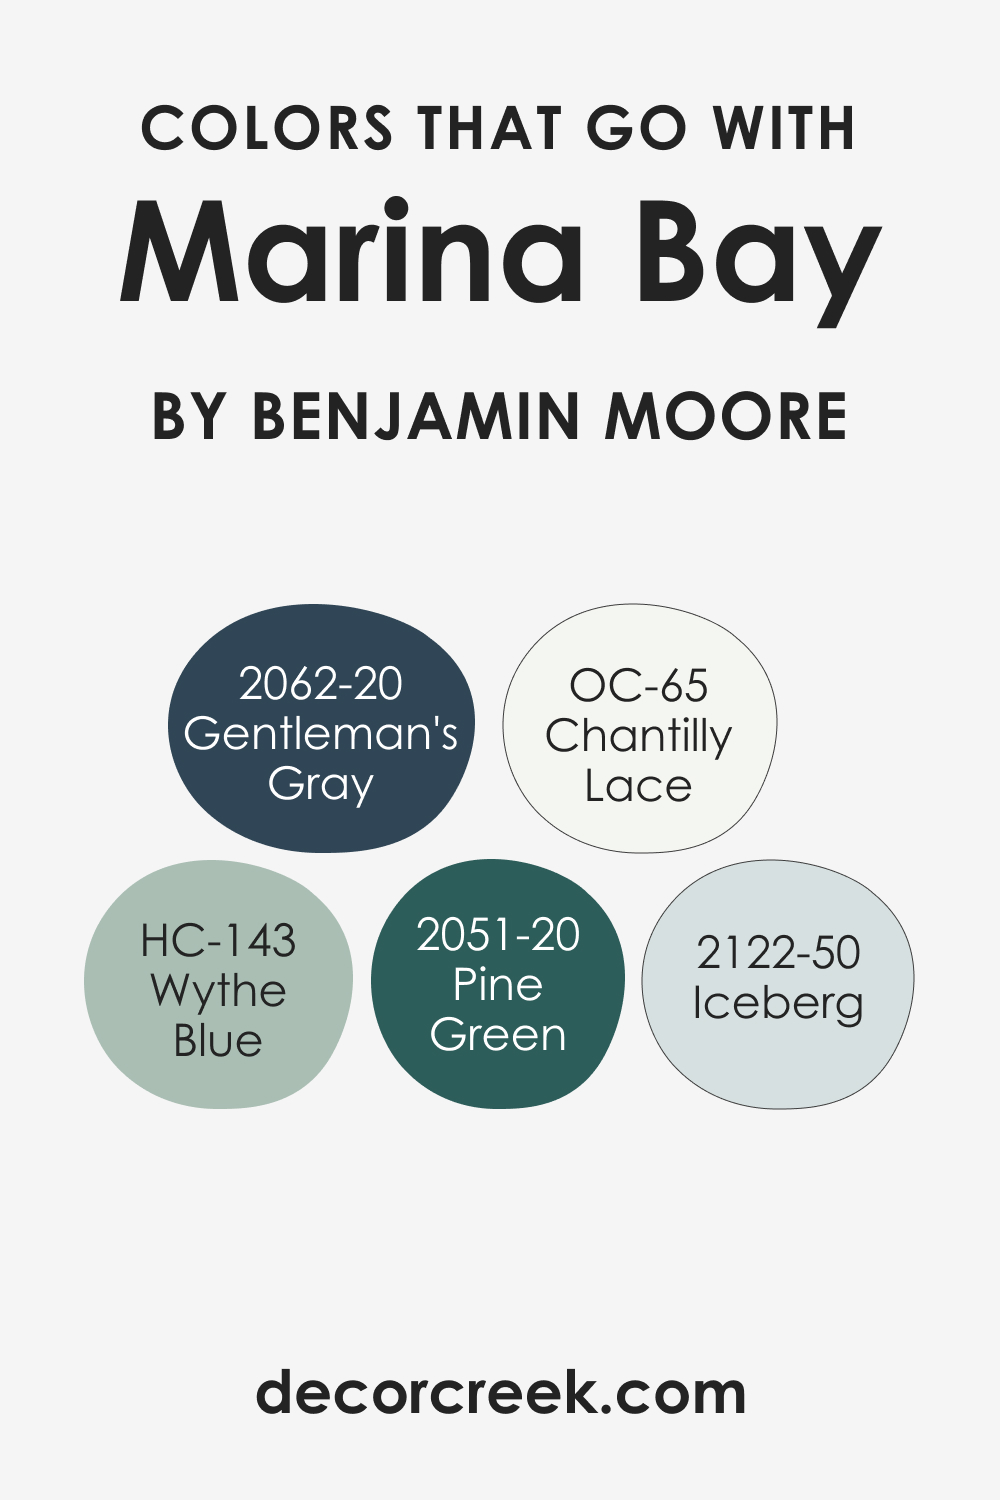 Colors That Go With Marina Bay 2036-50